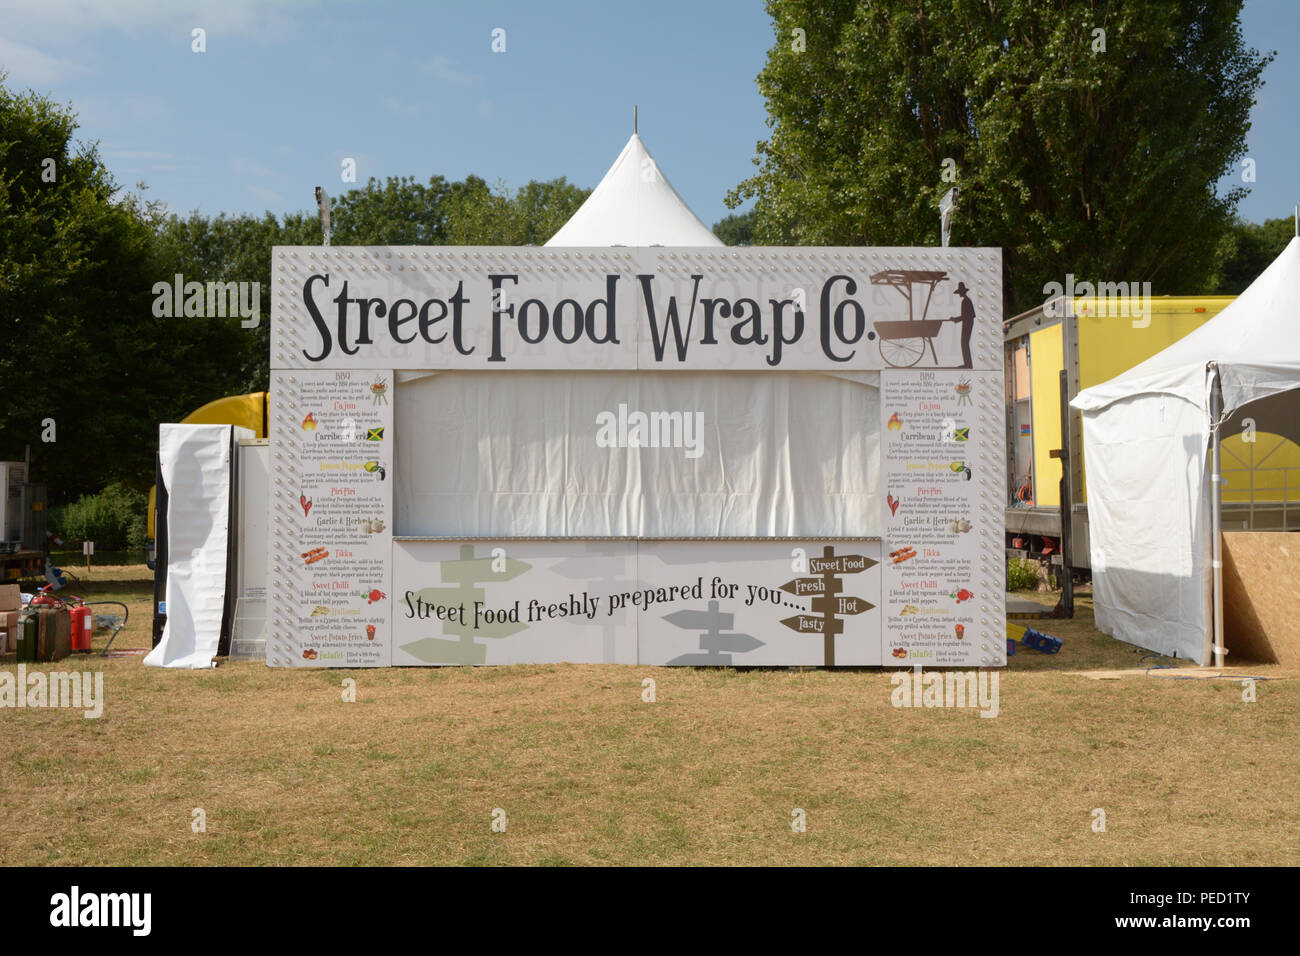 Street Food Wrap Co food stall at festival Stock Photo